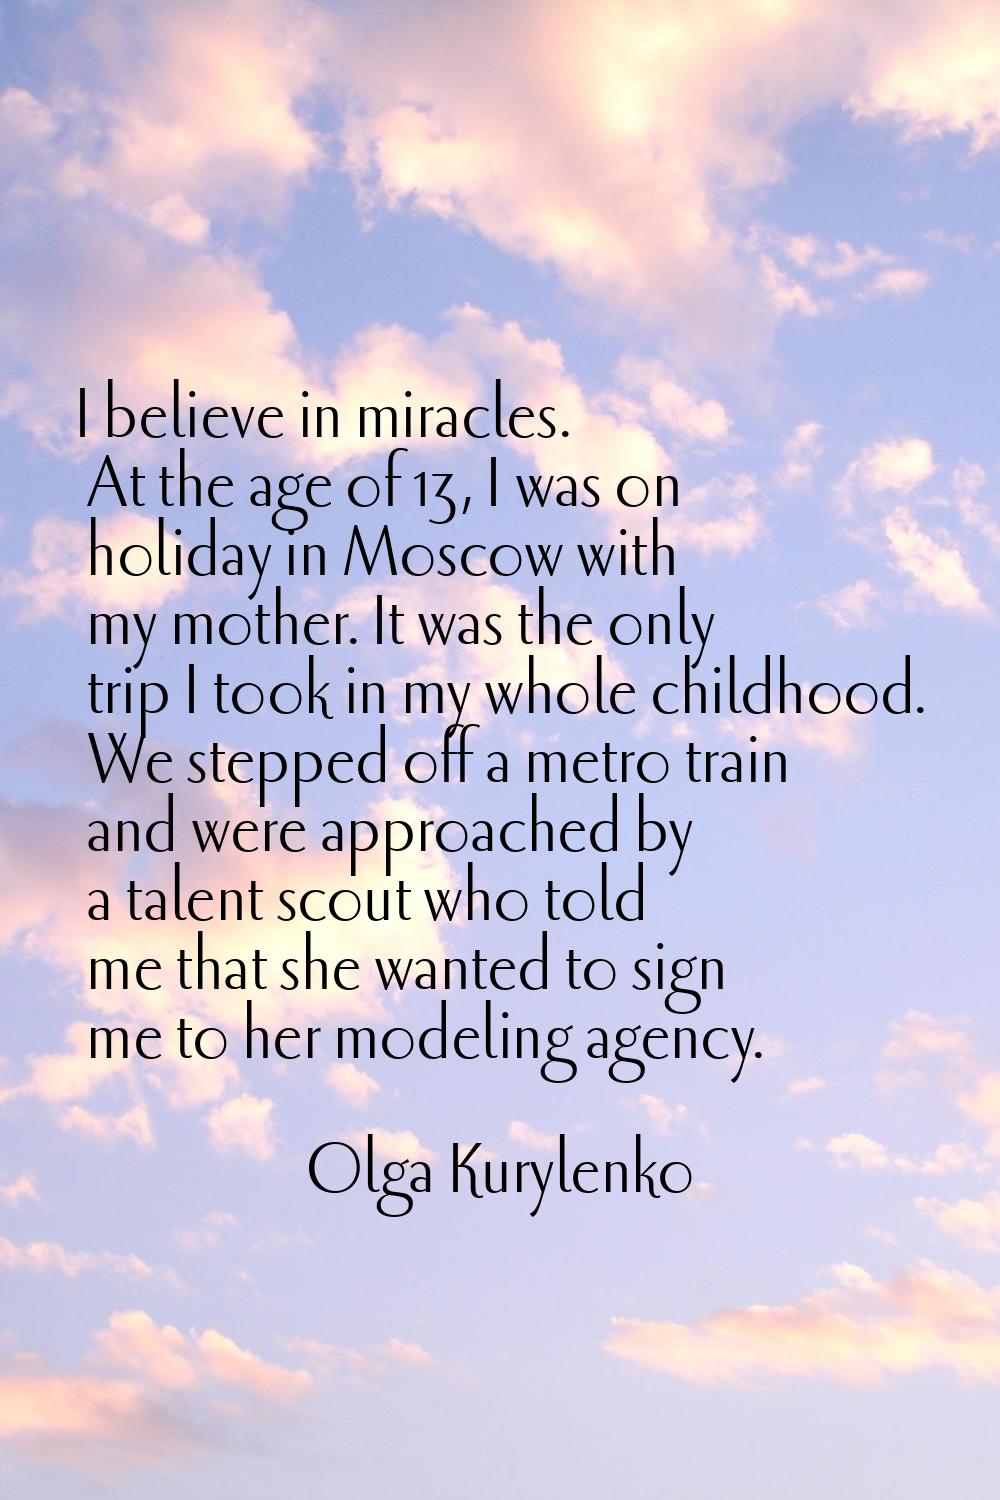 I believe in miracles. At the age of 13, I was on holiday in Moscow with my mother. It was the only